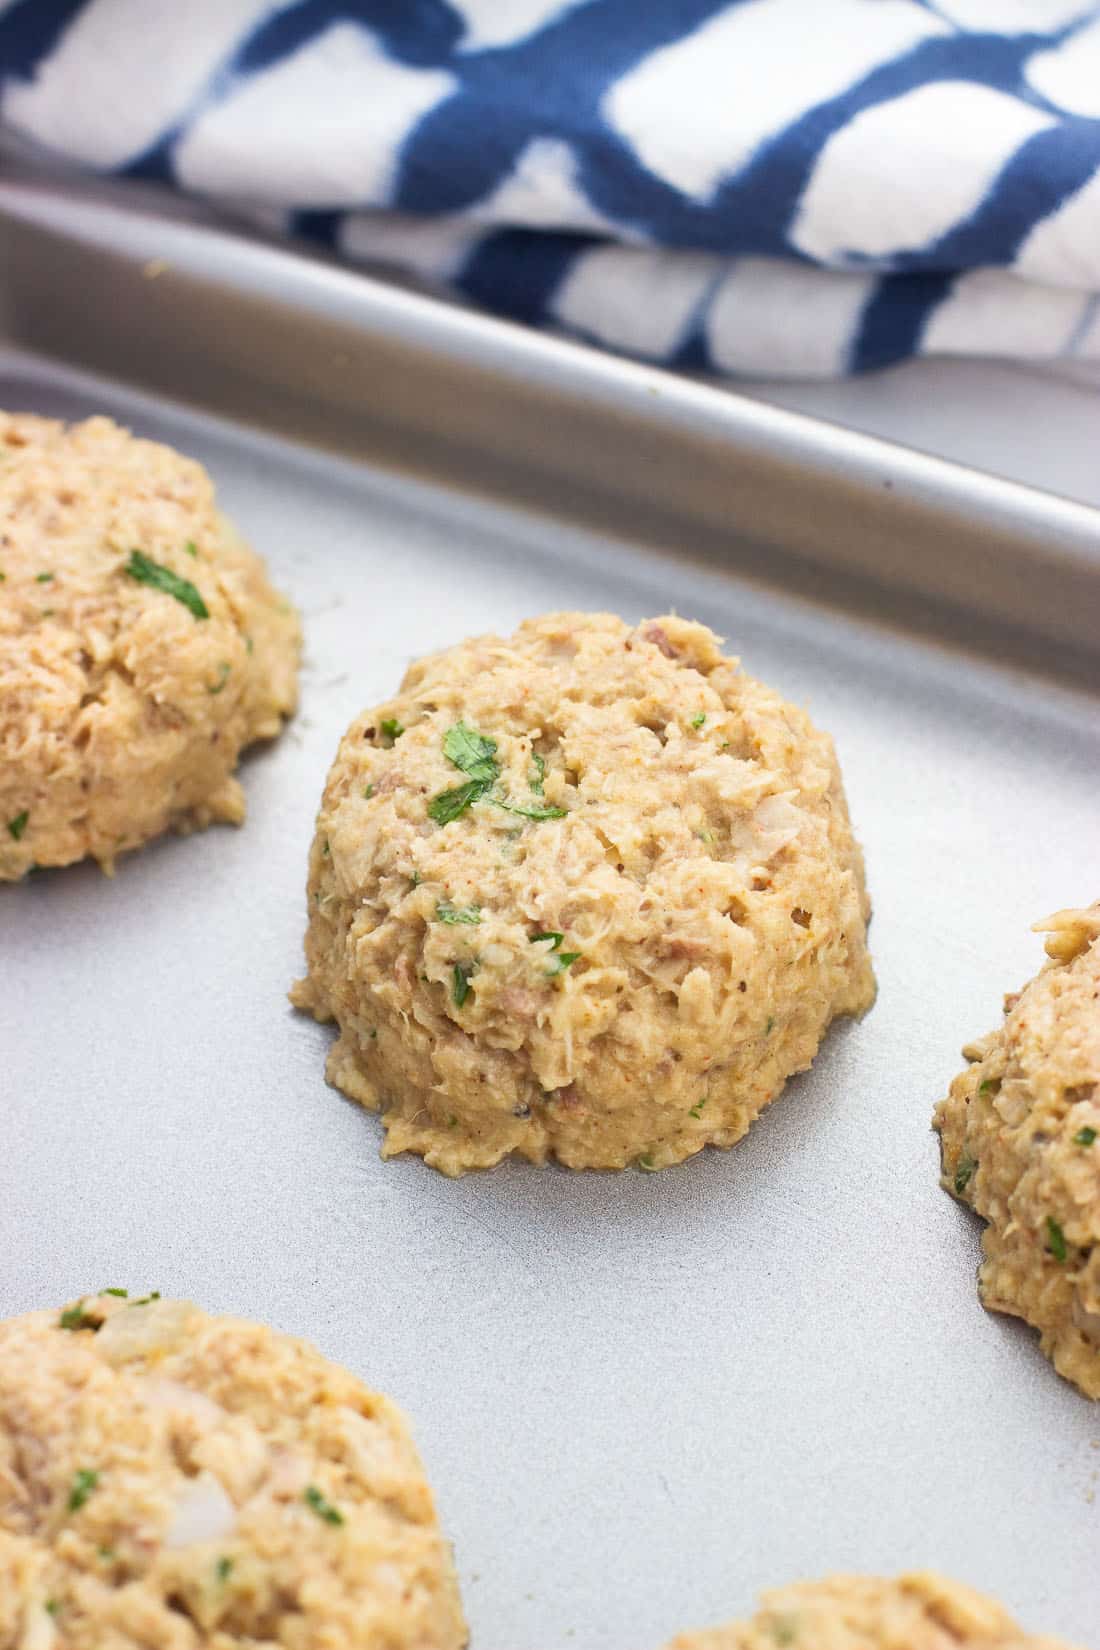 Shaped tuna cakes on a baking sheet before being baked.